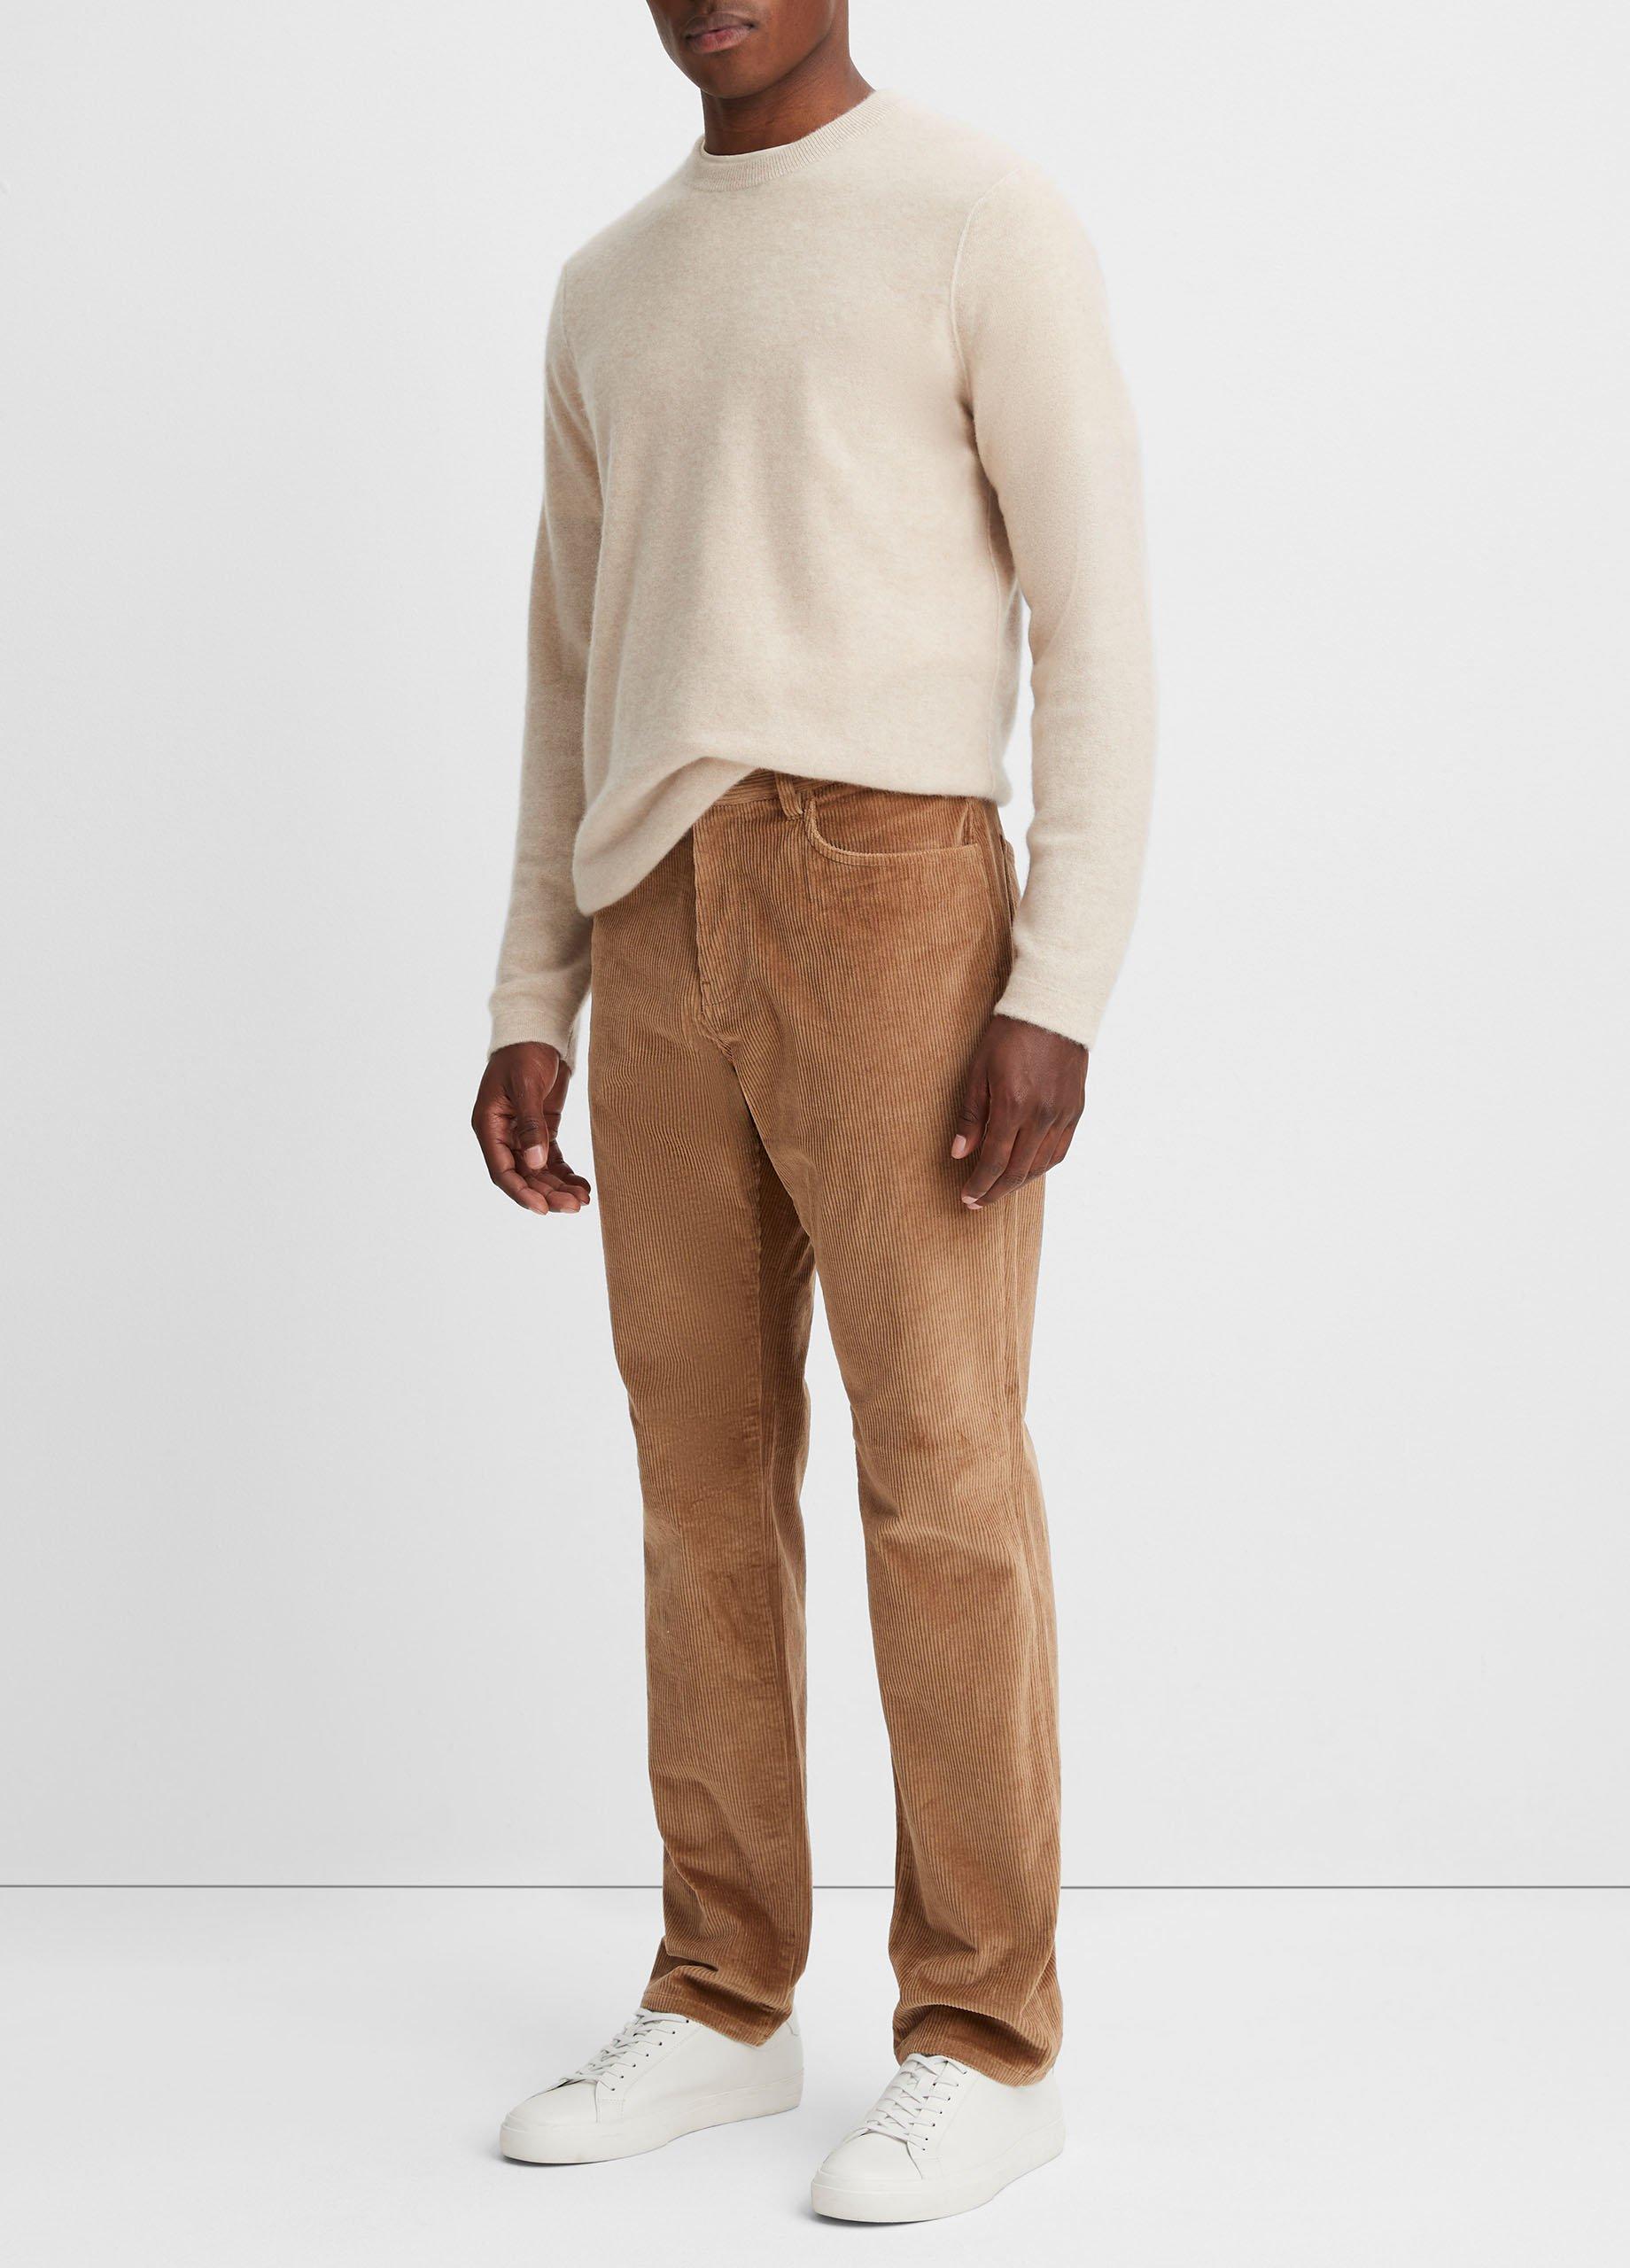 Wide Wale Corduroy Pant in Pants & Shorts